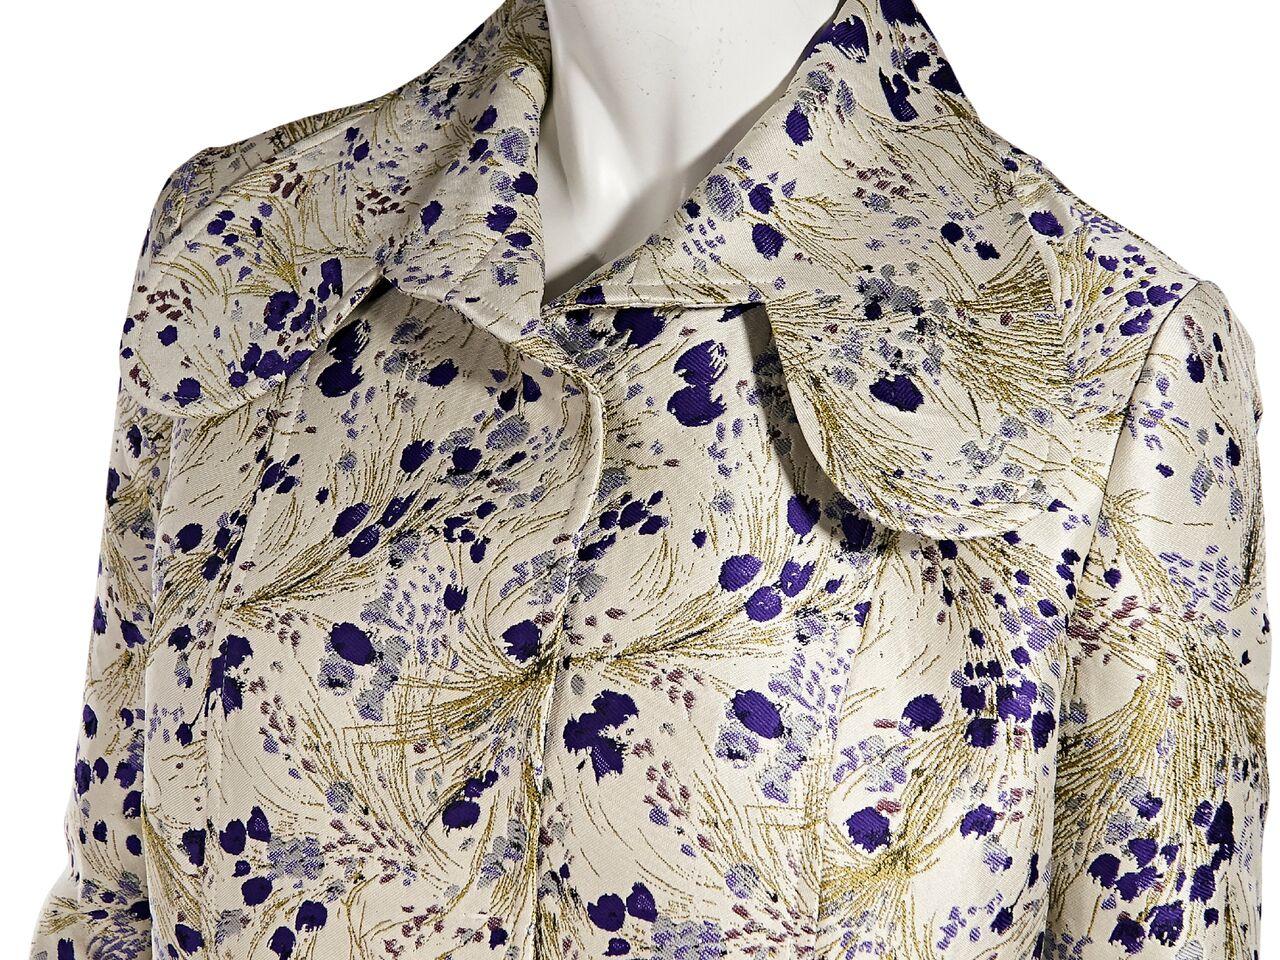 Product details:  Multicolor floral brocade jacket by Giambattista Valli.  Oversized spread collar.  On-seam slide front pockets.  Concealed front closure.  34